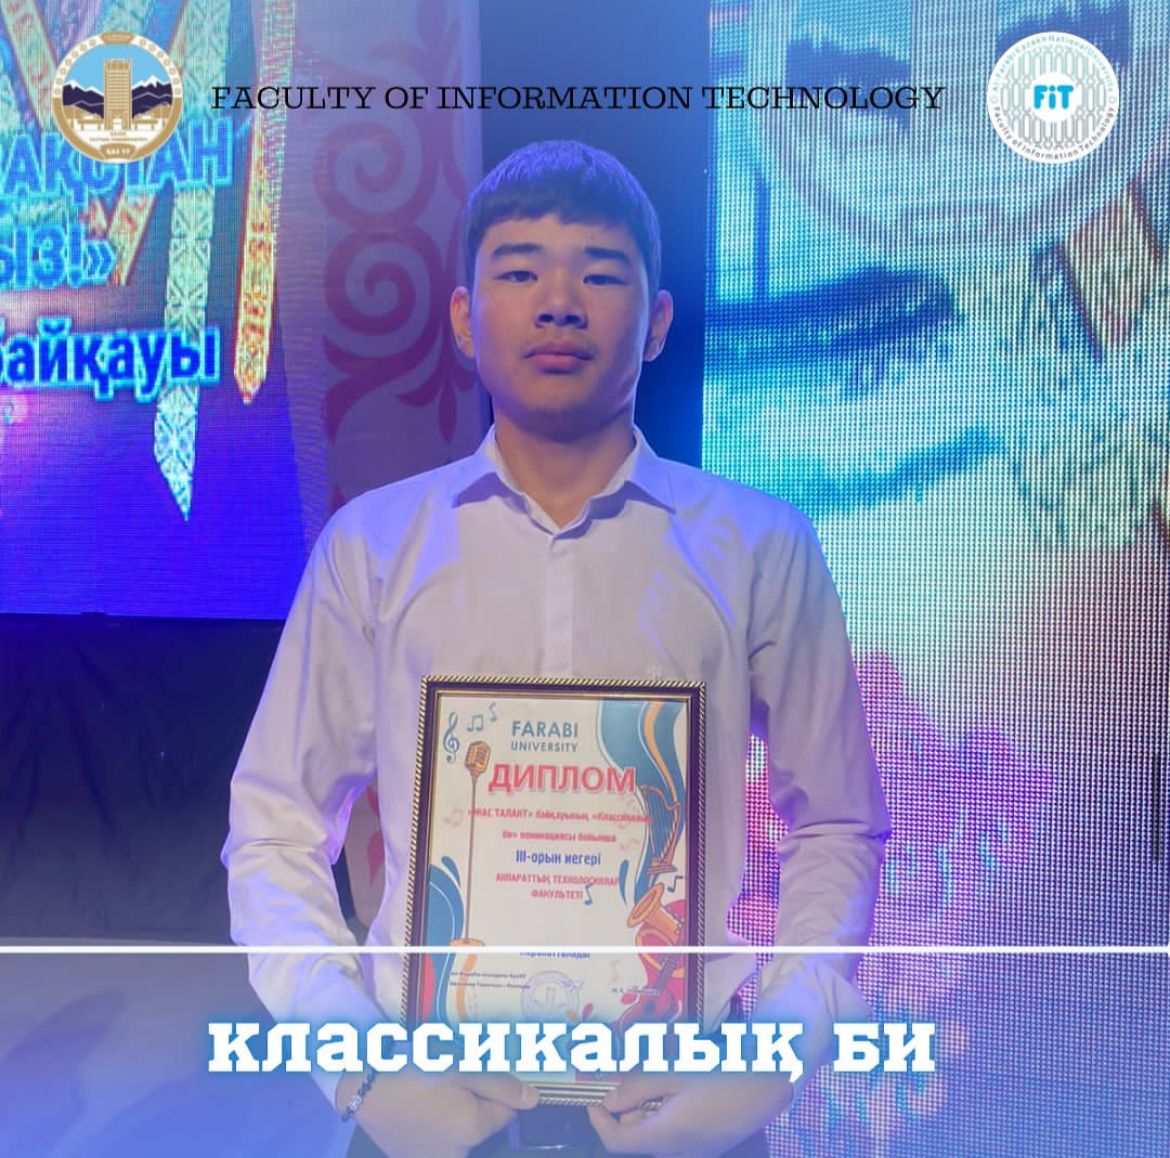 “WE ARE YOUTH FROM NEW KAZAKHSTAN”